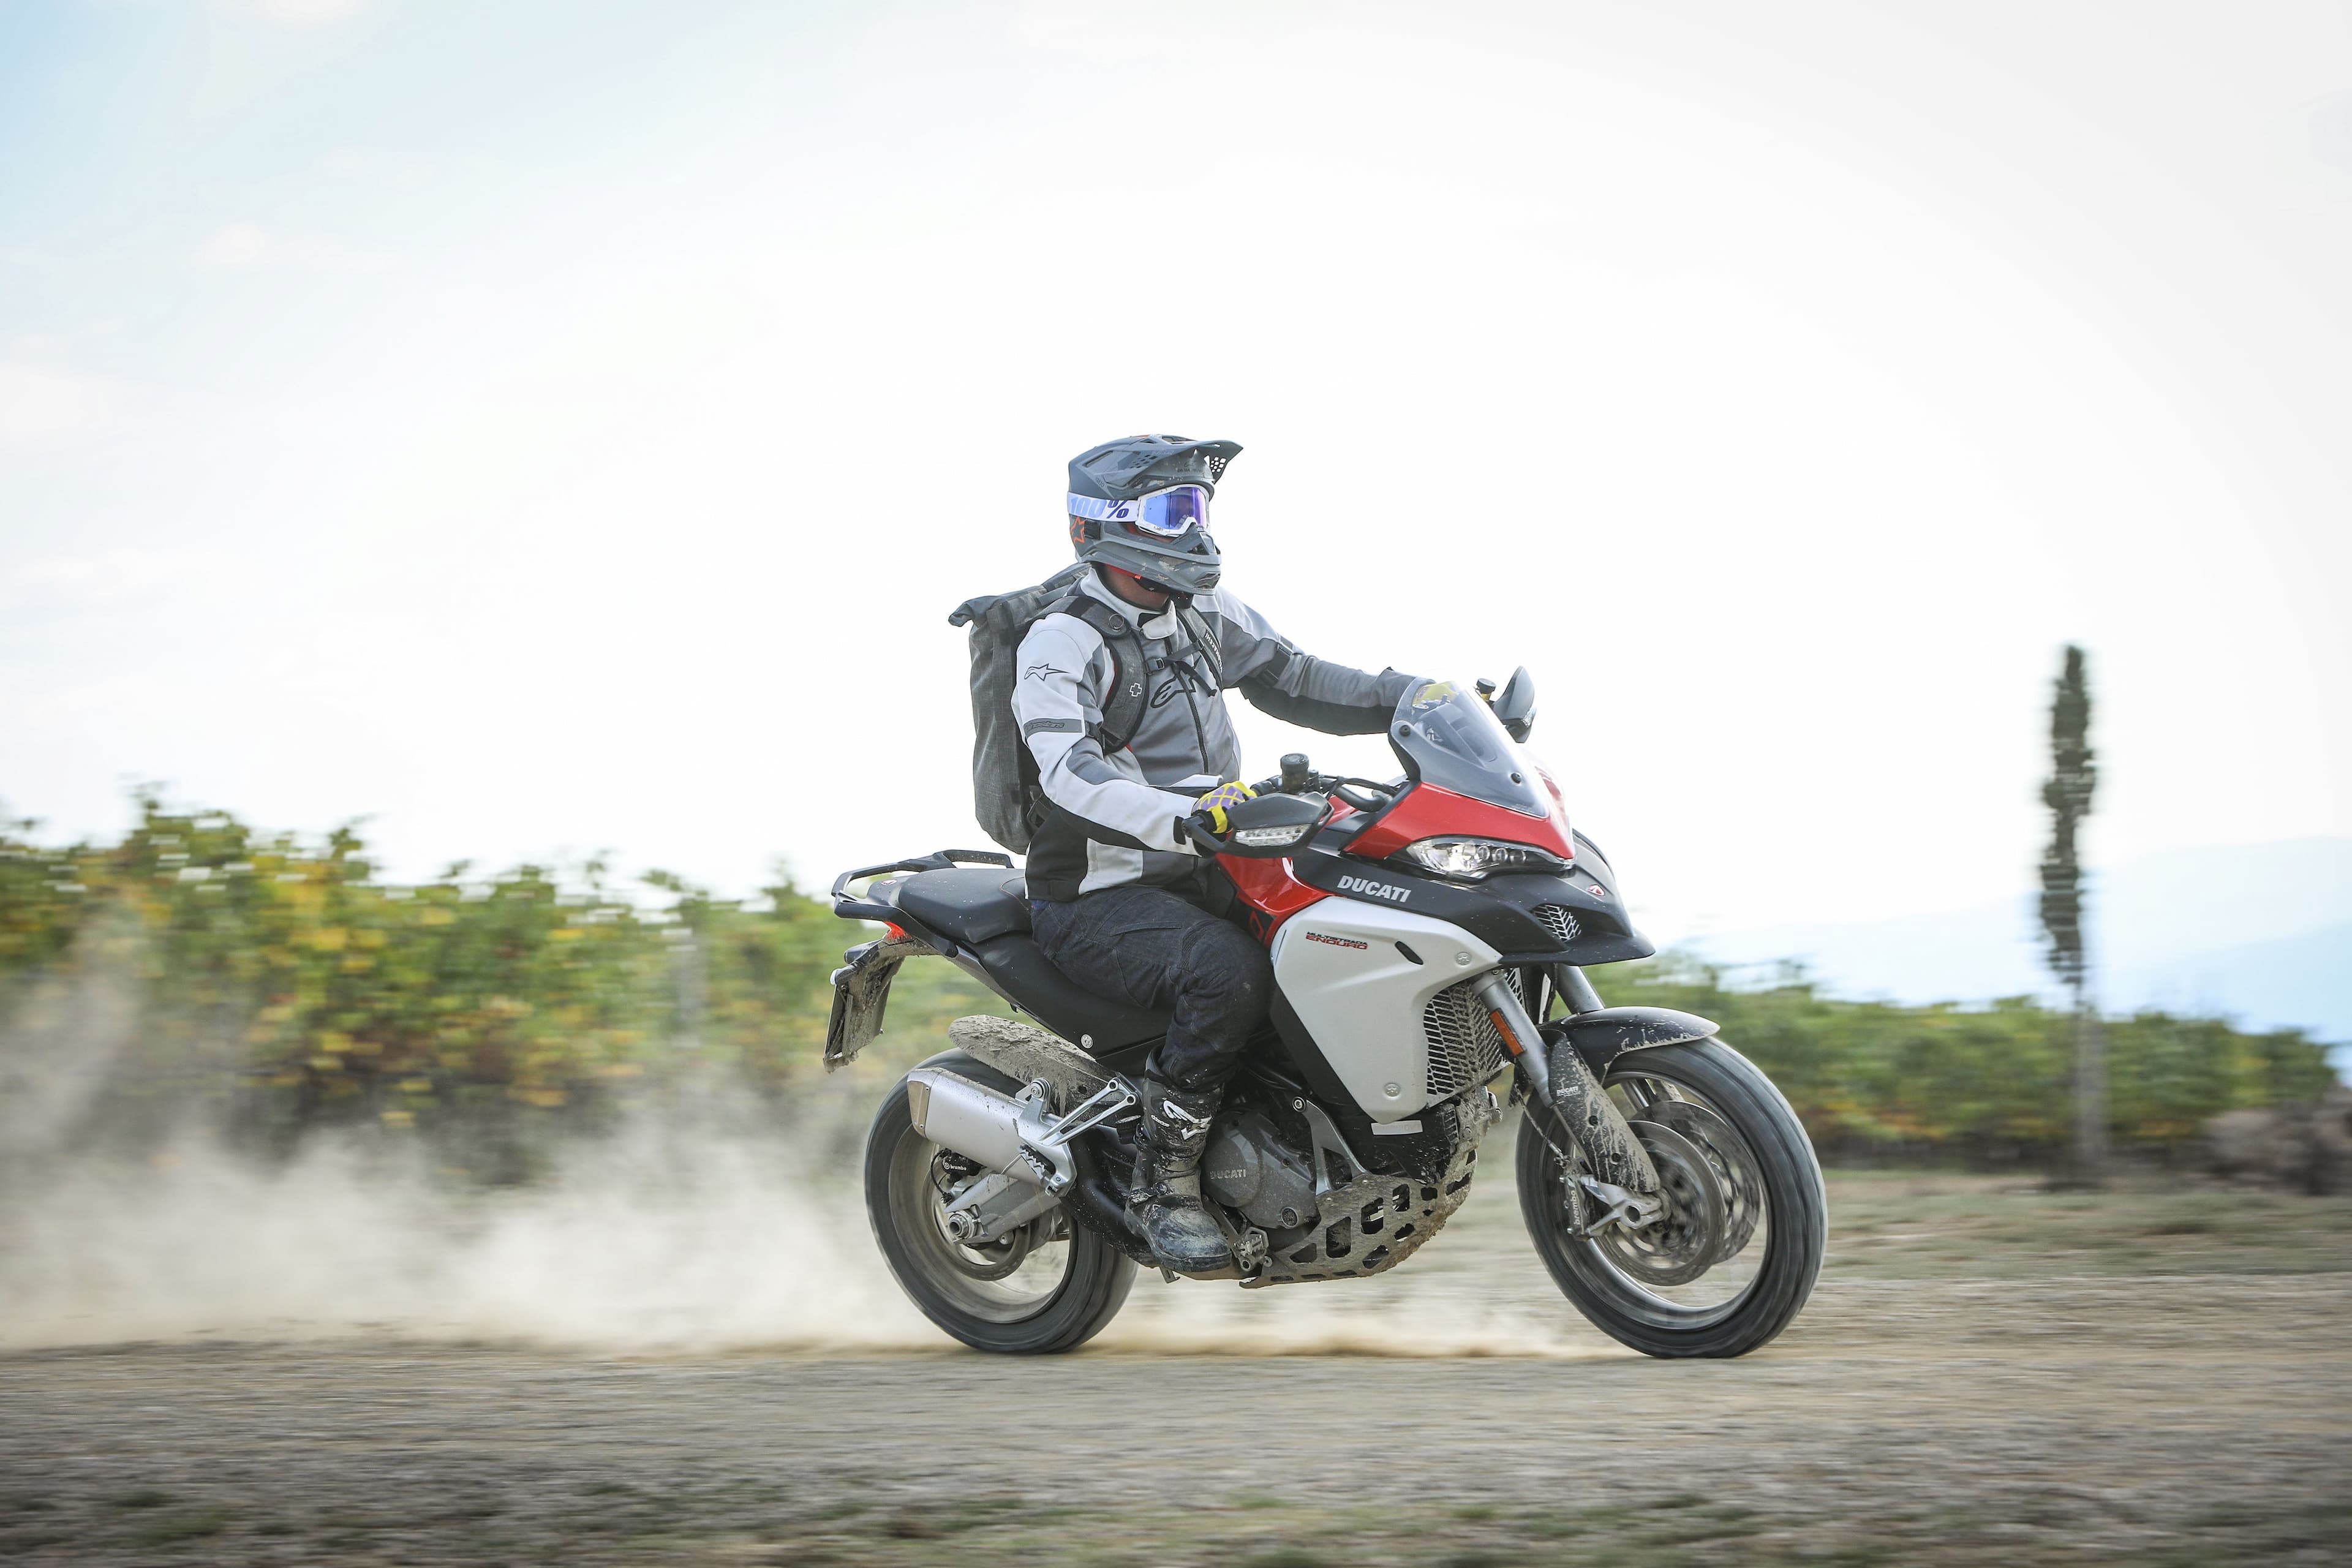 2019 Ducati Multistrada 1260 Enduro First Ride: This Italian Stallion Is Ready for Real Adventure